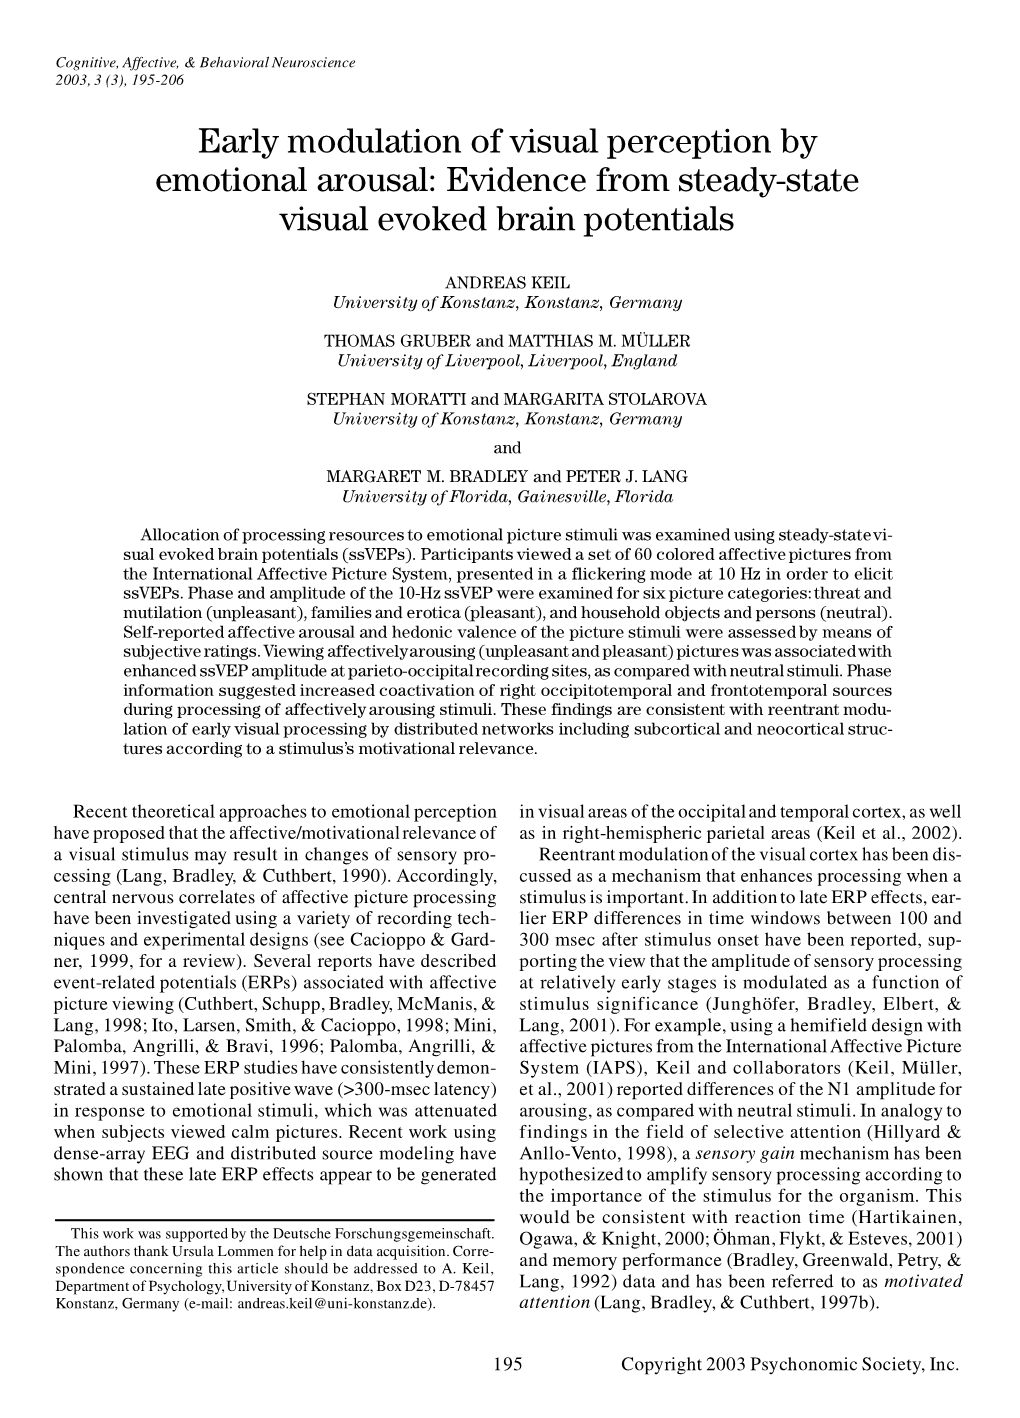 Evidence from Steady-State Visual Evoked Brain Potentials